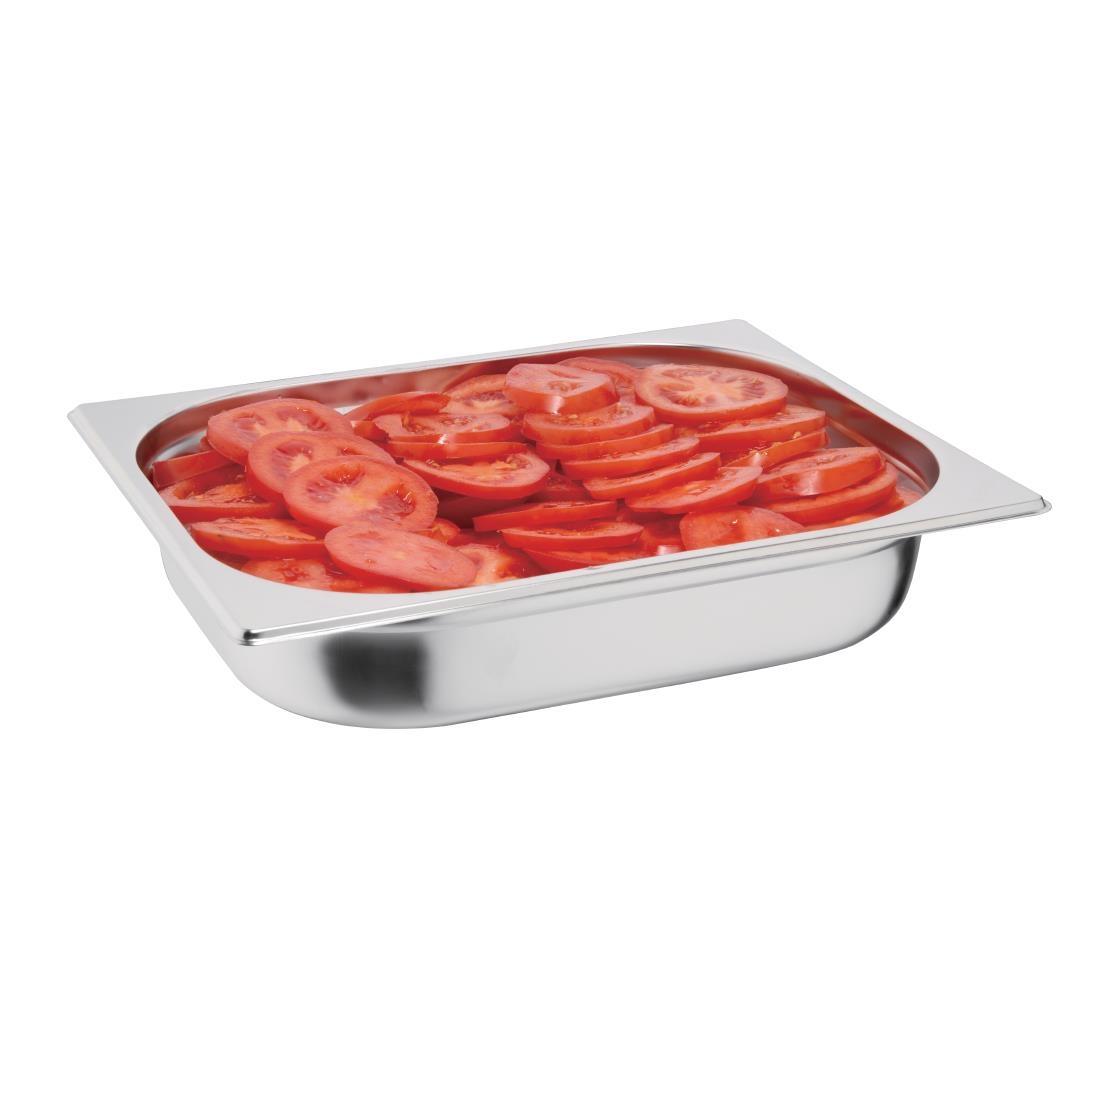 Vogue Stainless Steel 1/2 Gastronorm Pan 65mm - K927  - 8